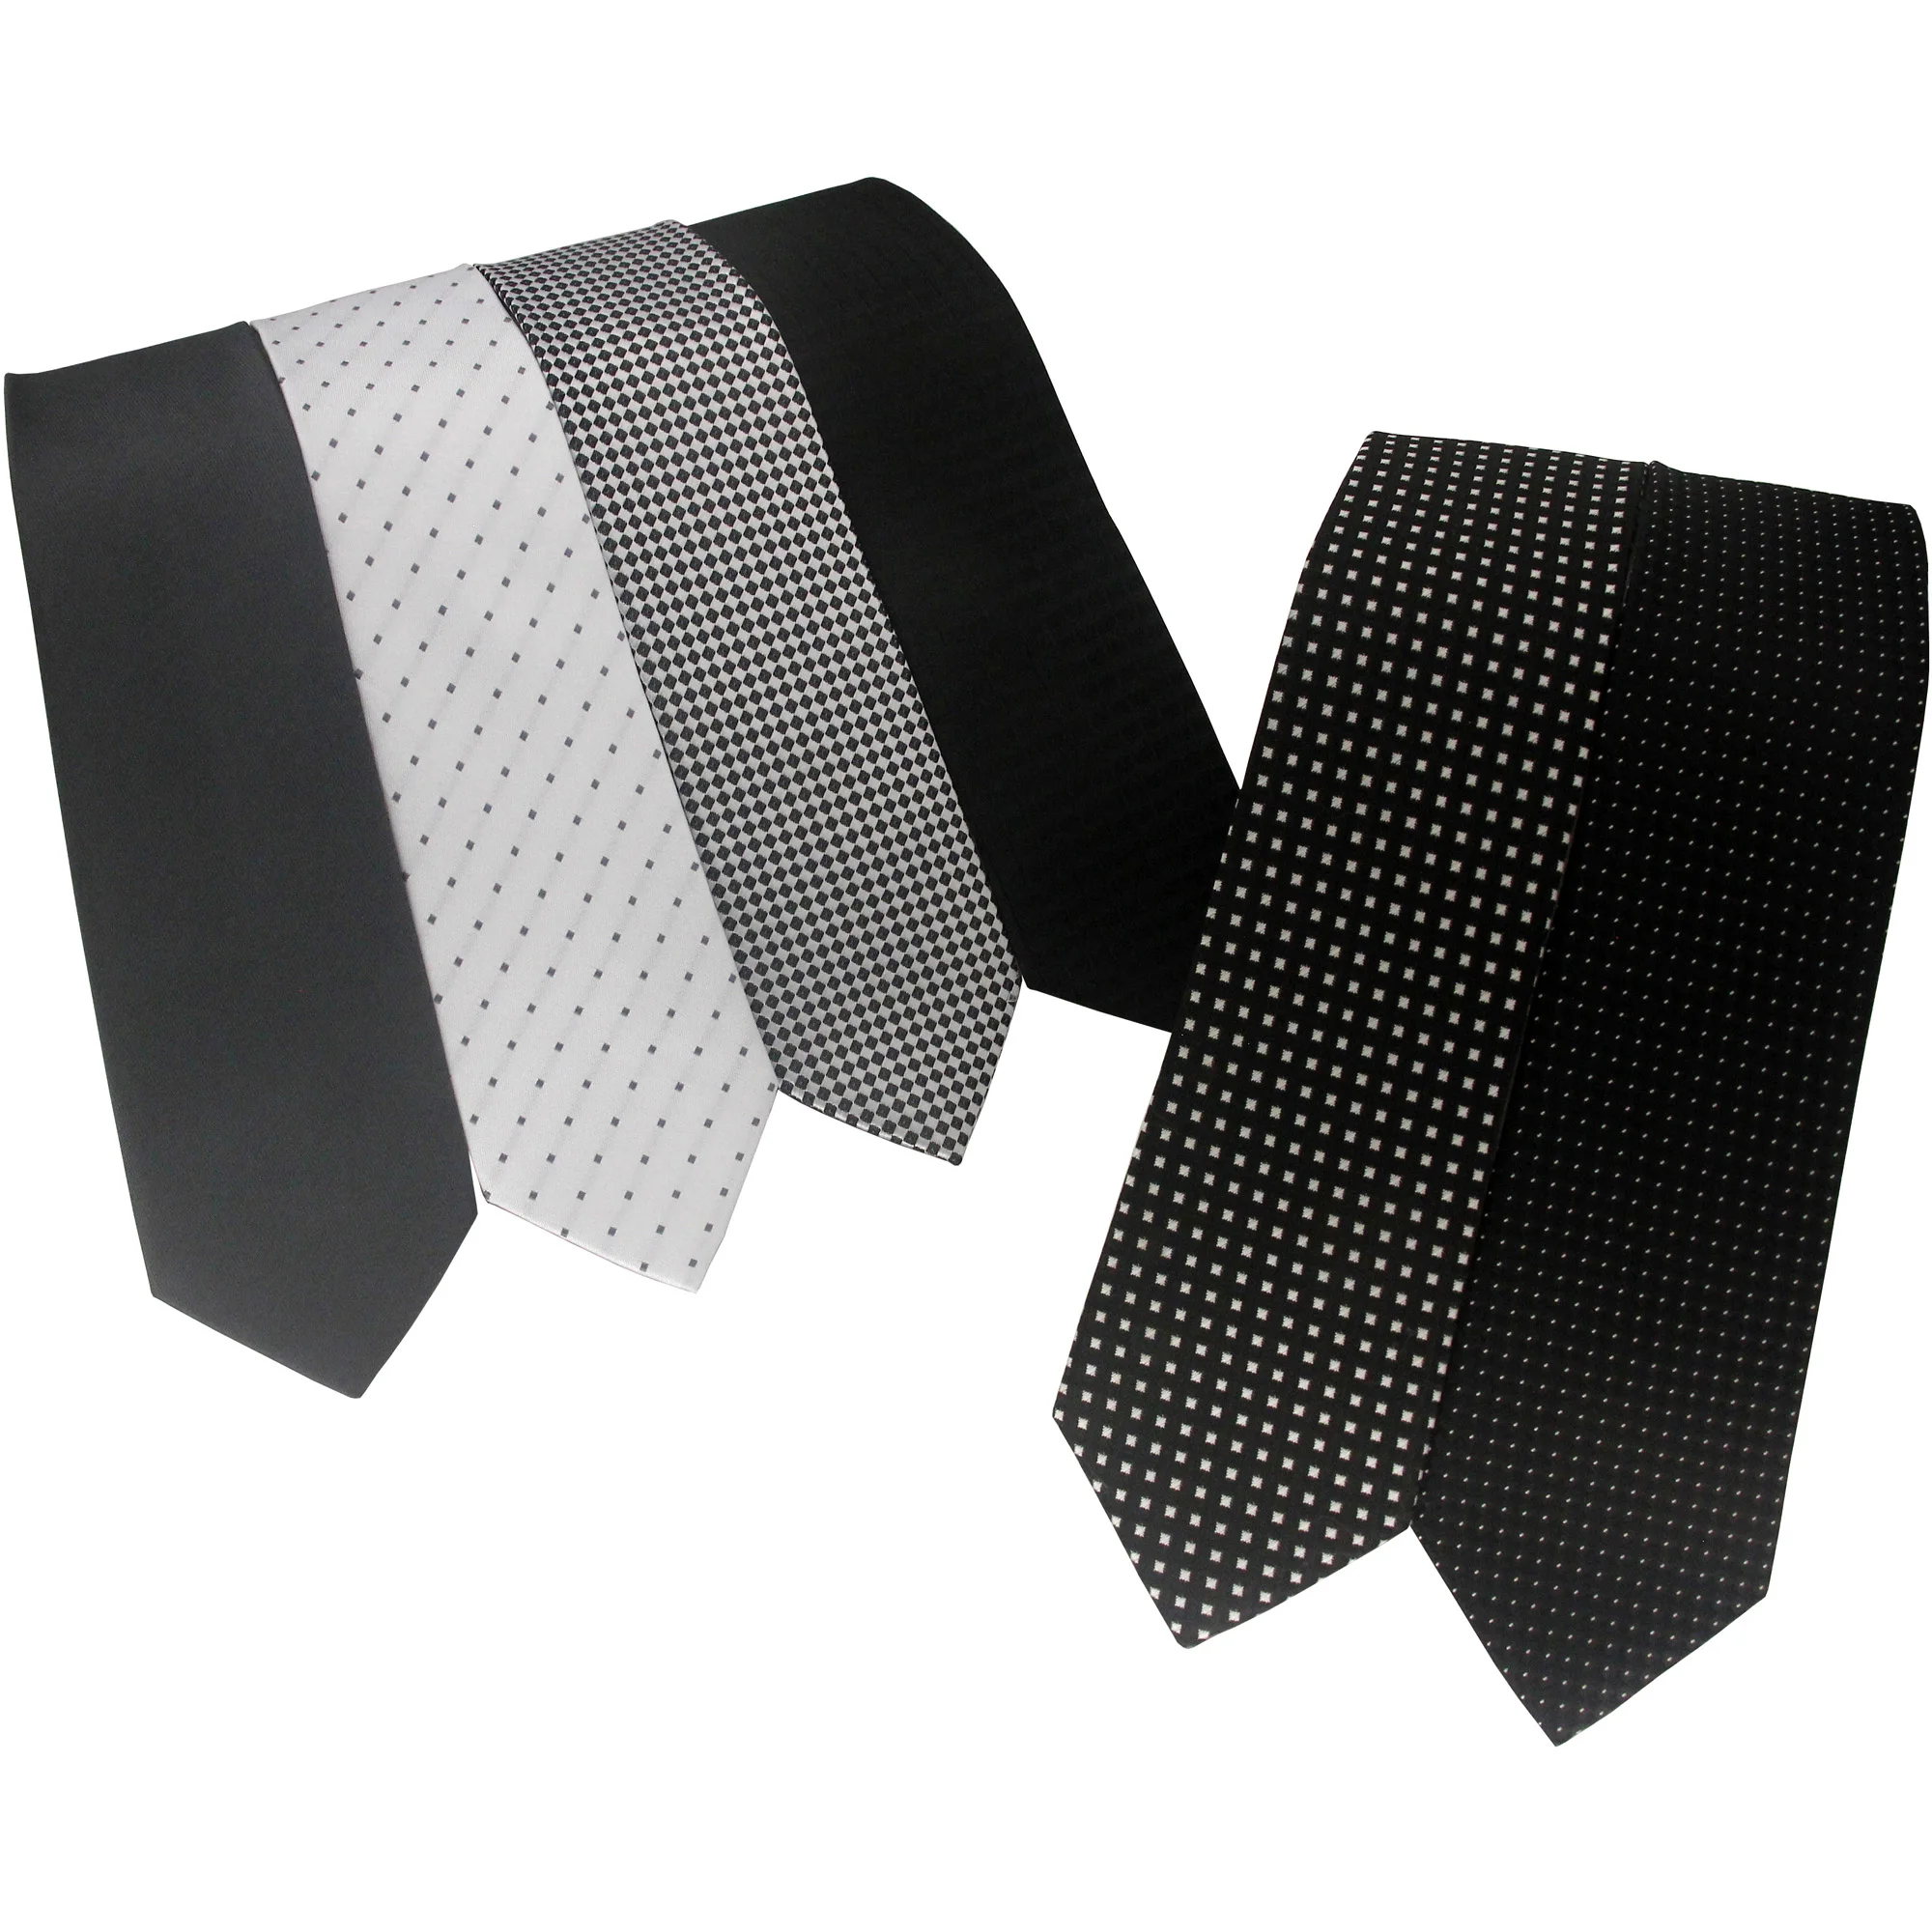 Fashion Ties for Men Accessories Pack of 6 3